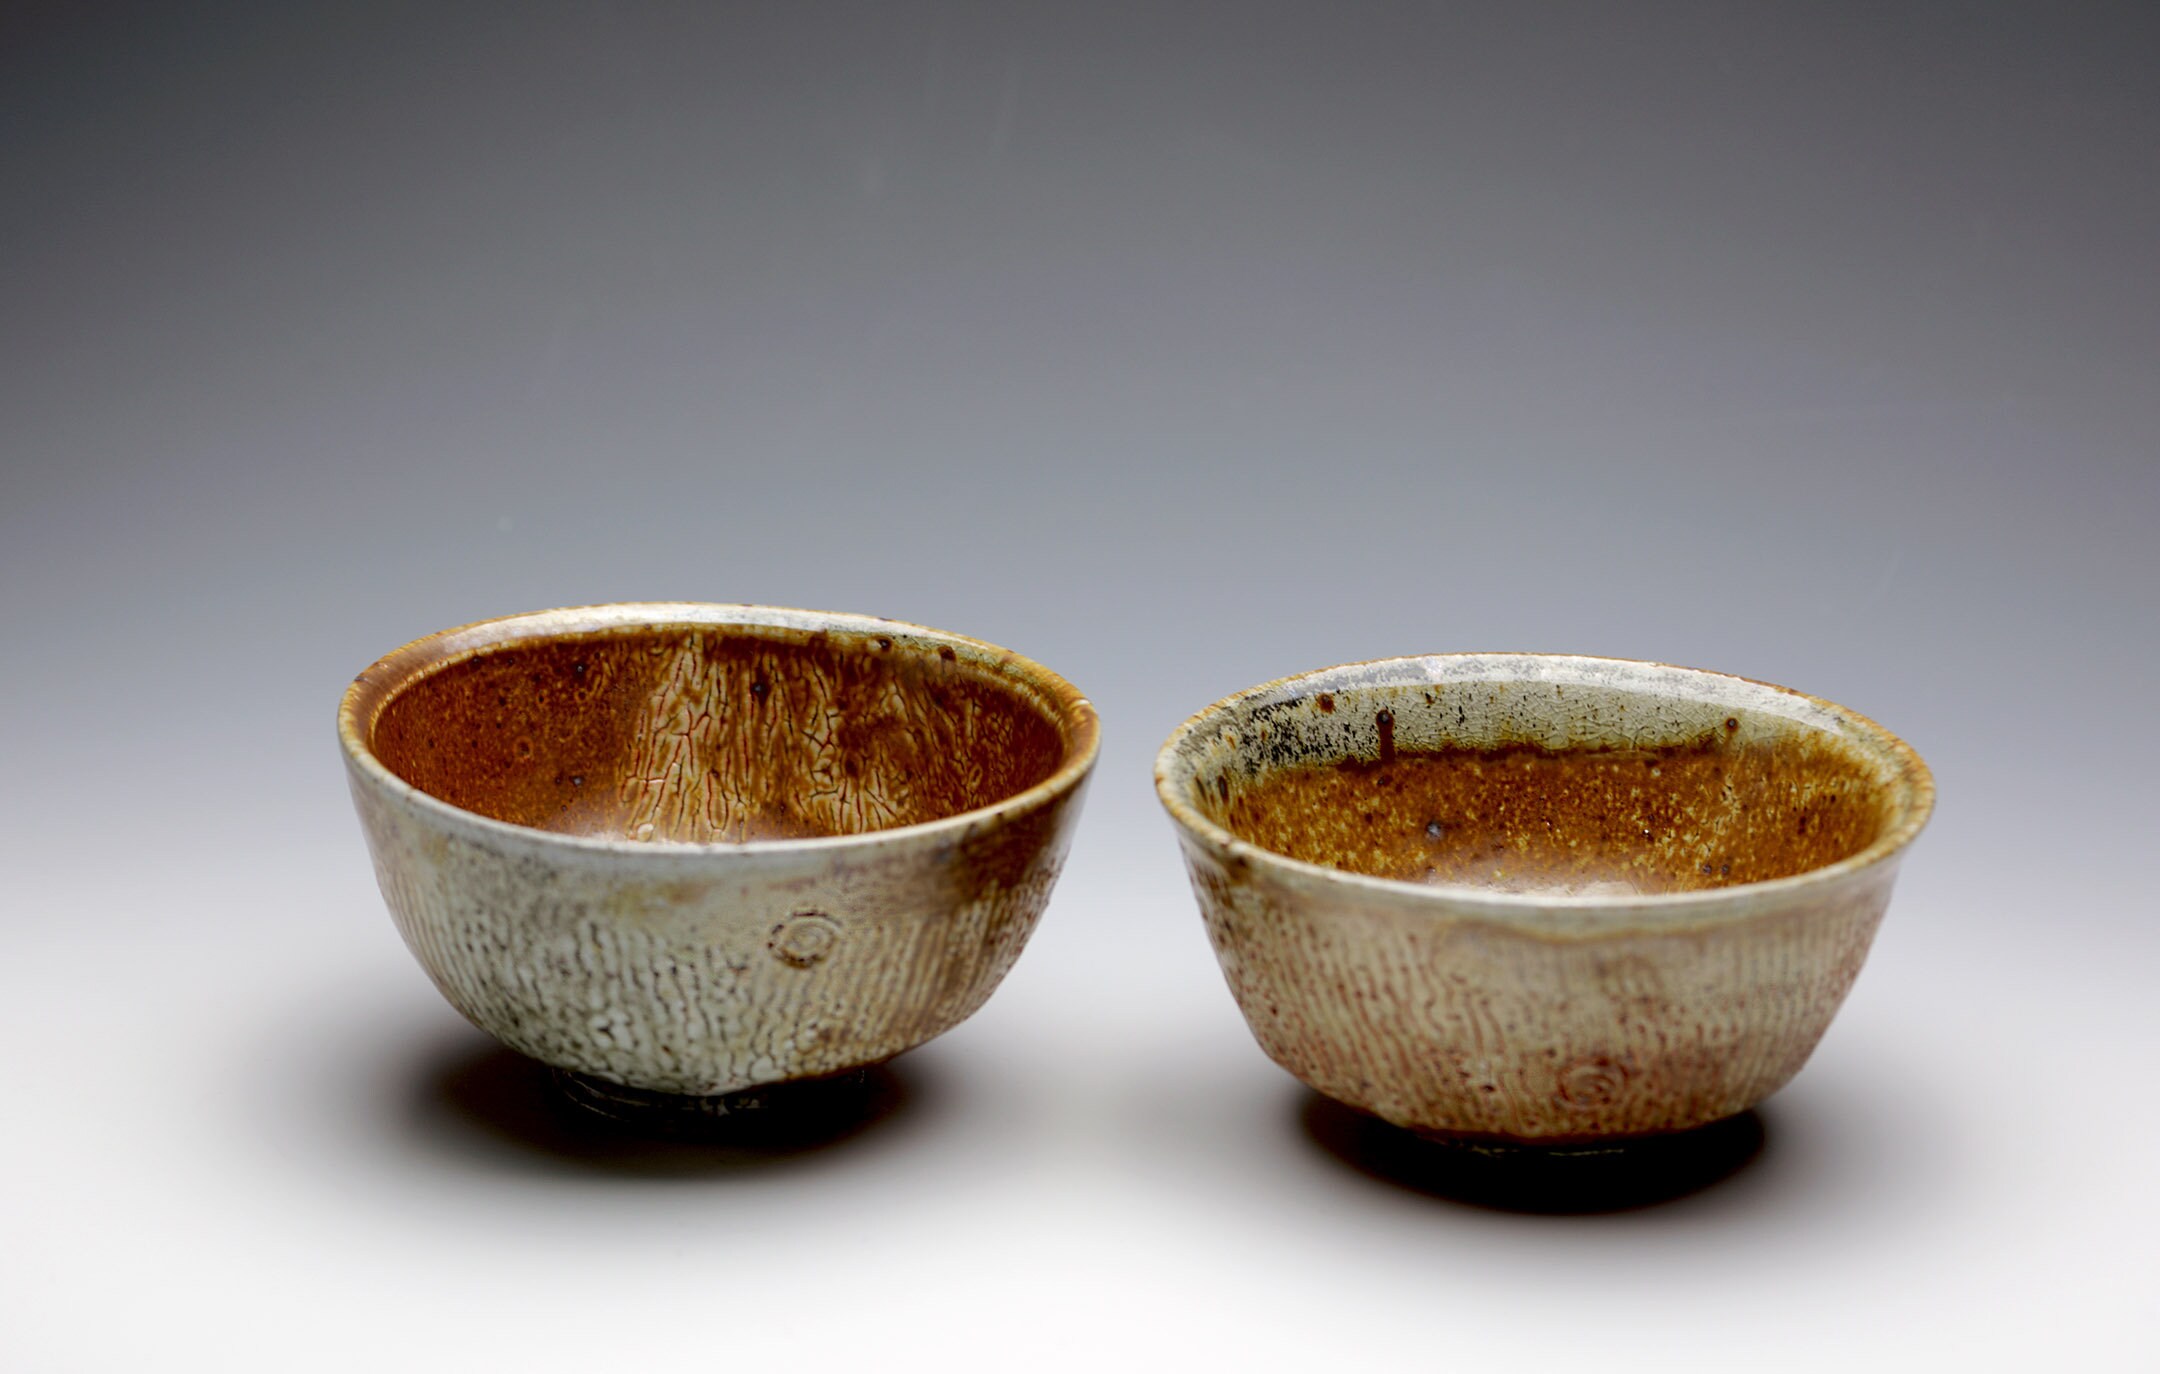 Soda Fired Porcelain Blend clay,Small Bowls One of A Kind